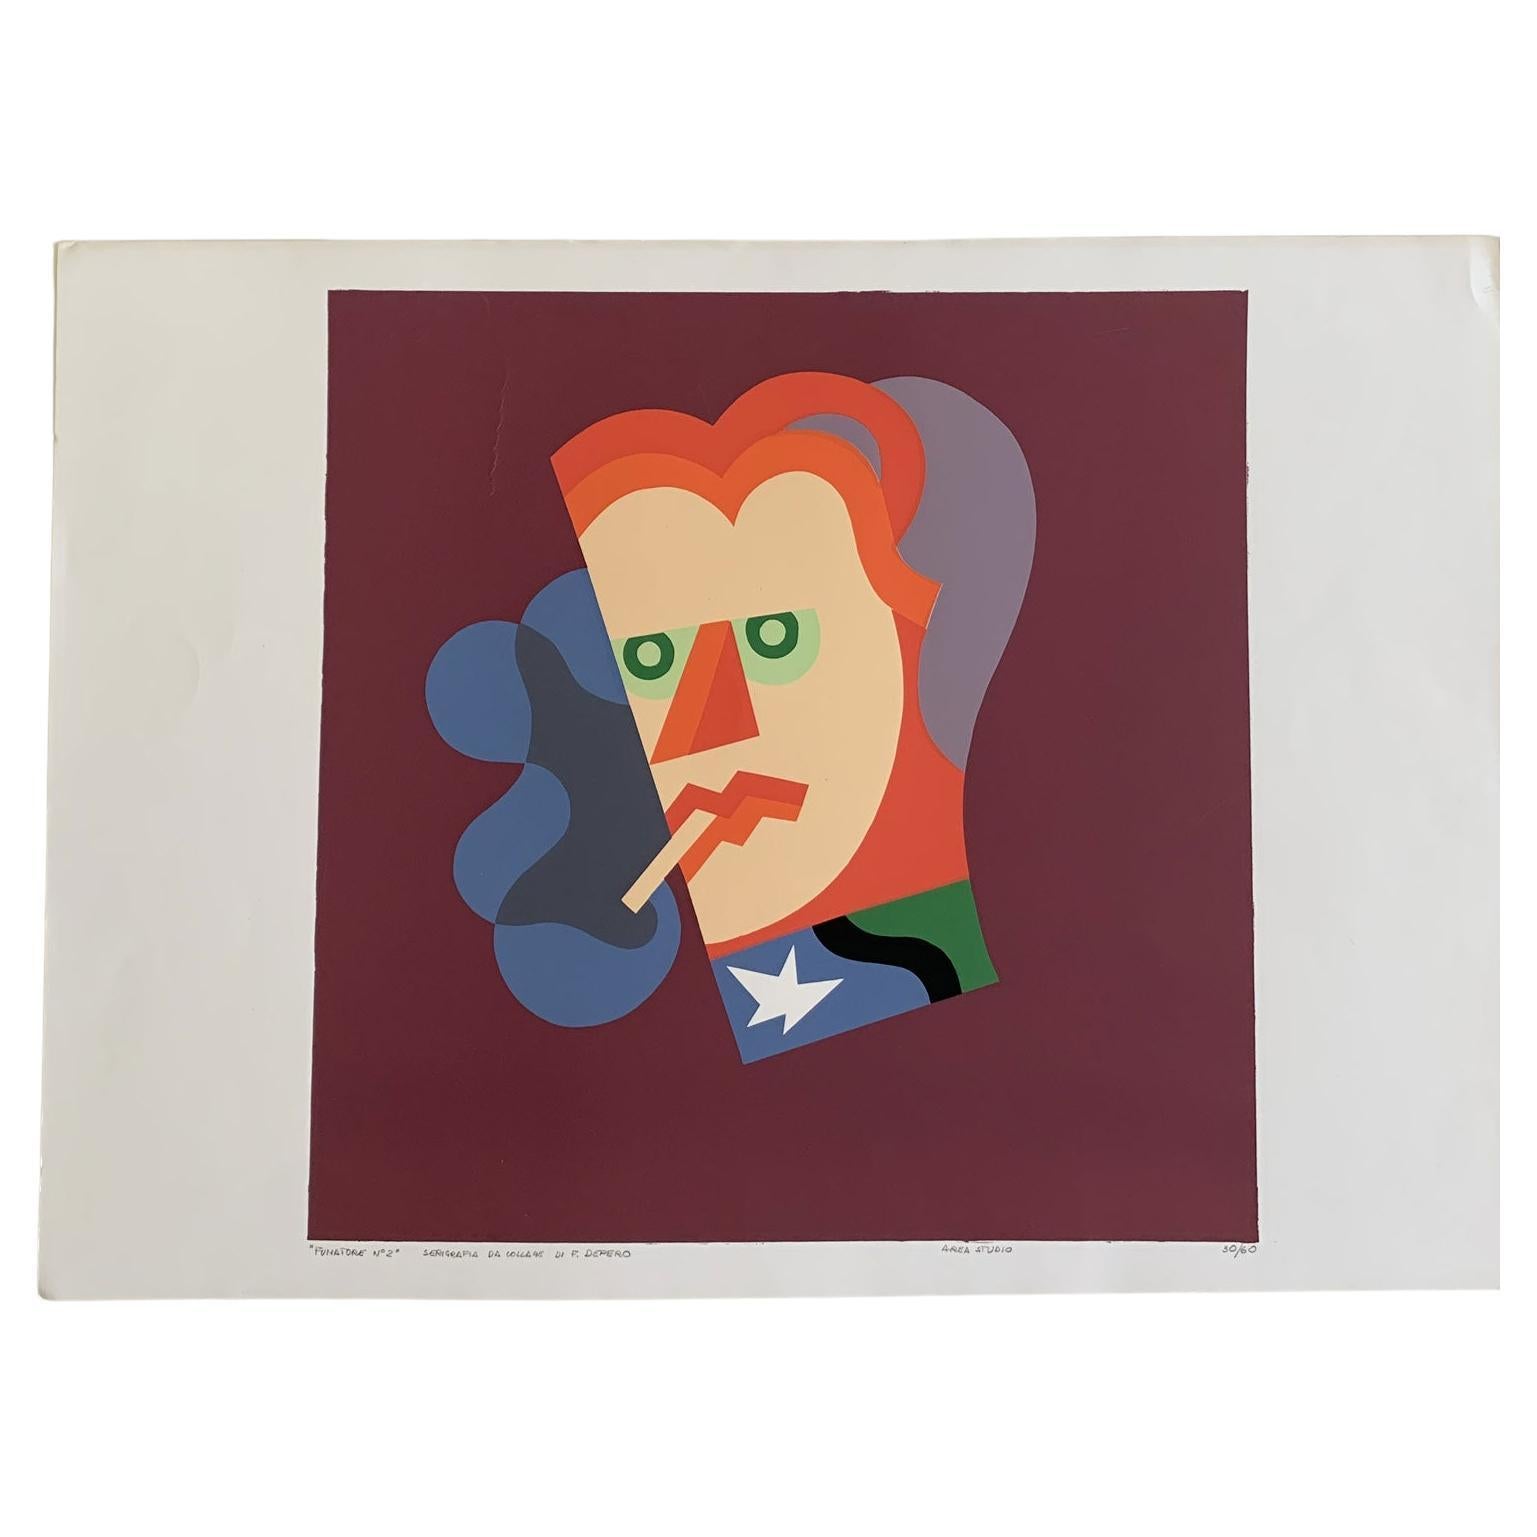 Italy 1974 Post -Modern Depero Multi-Color Print on Paper Numbered Edition